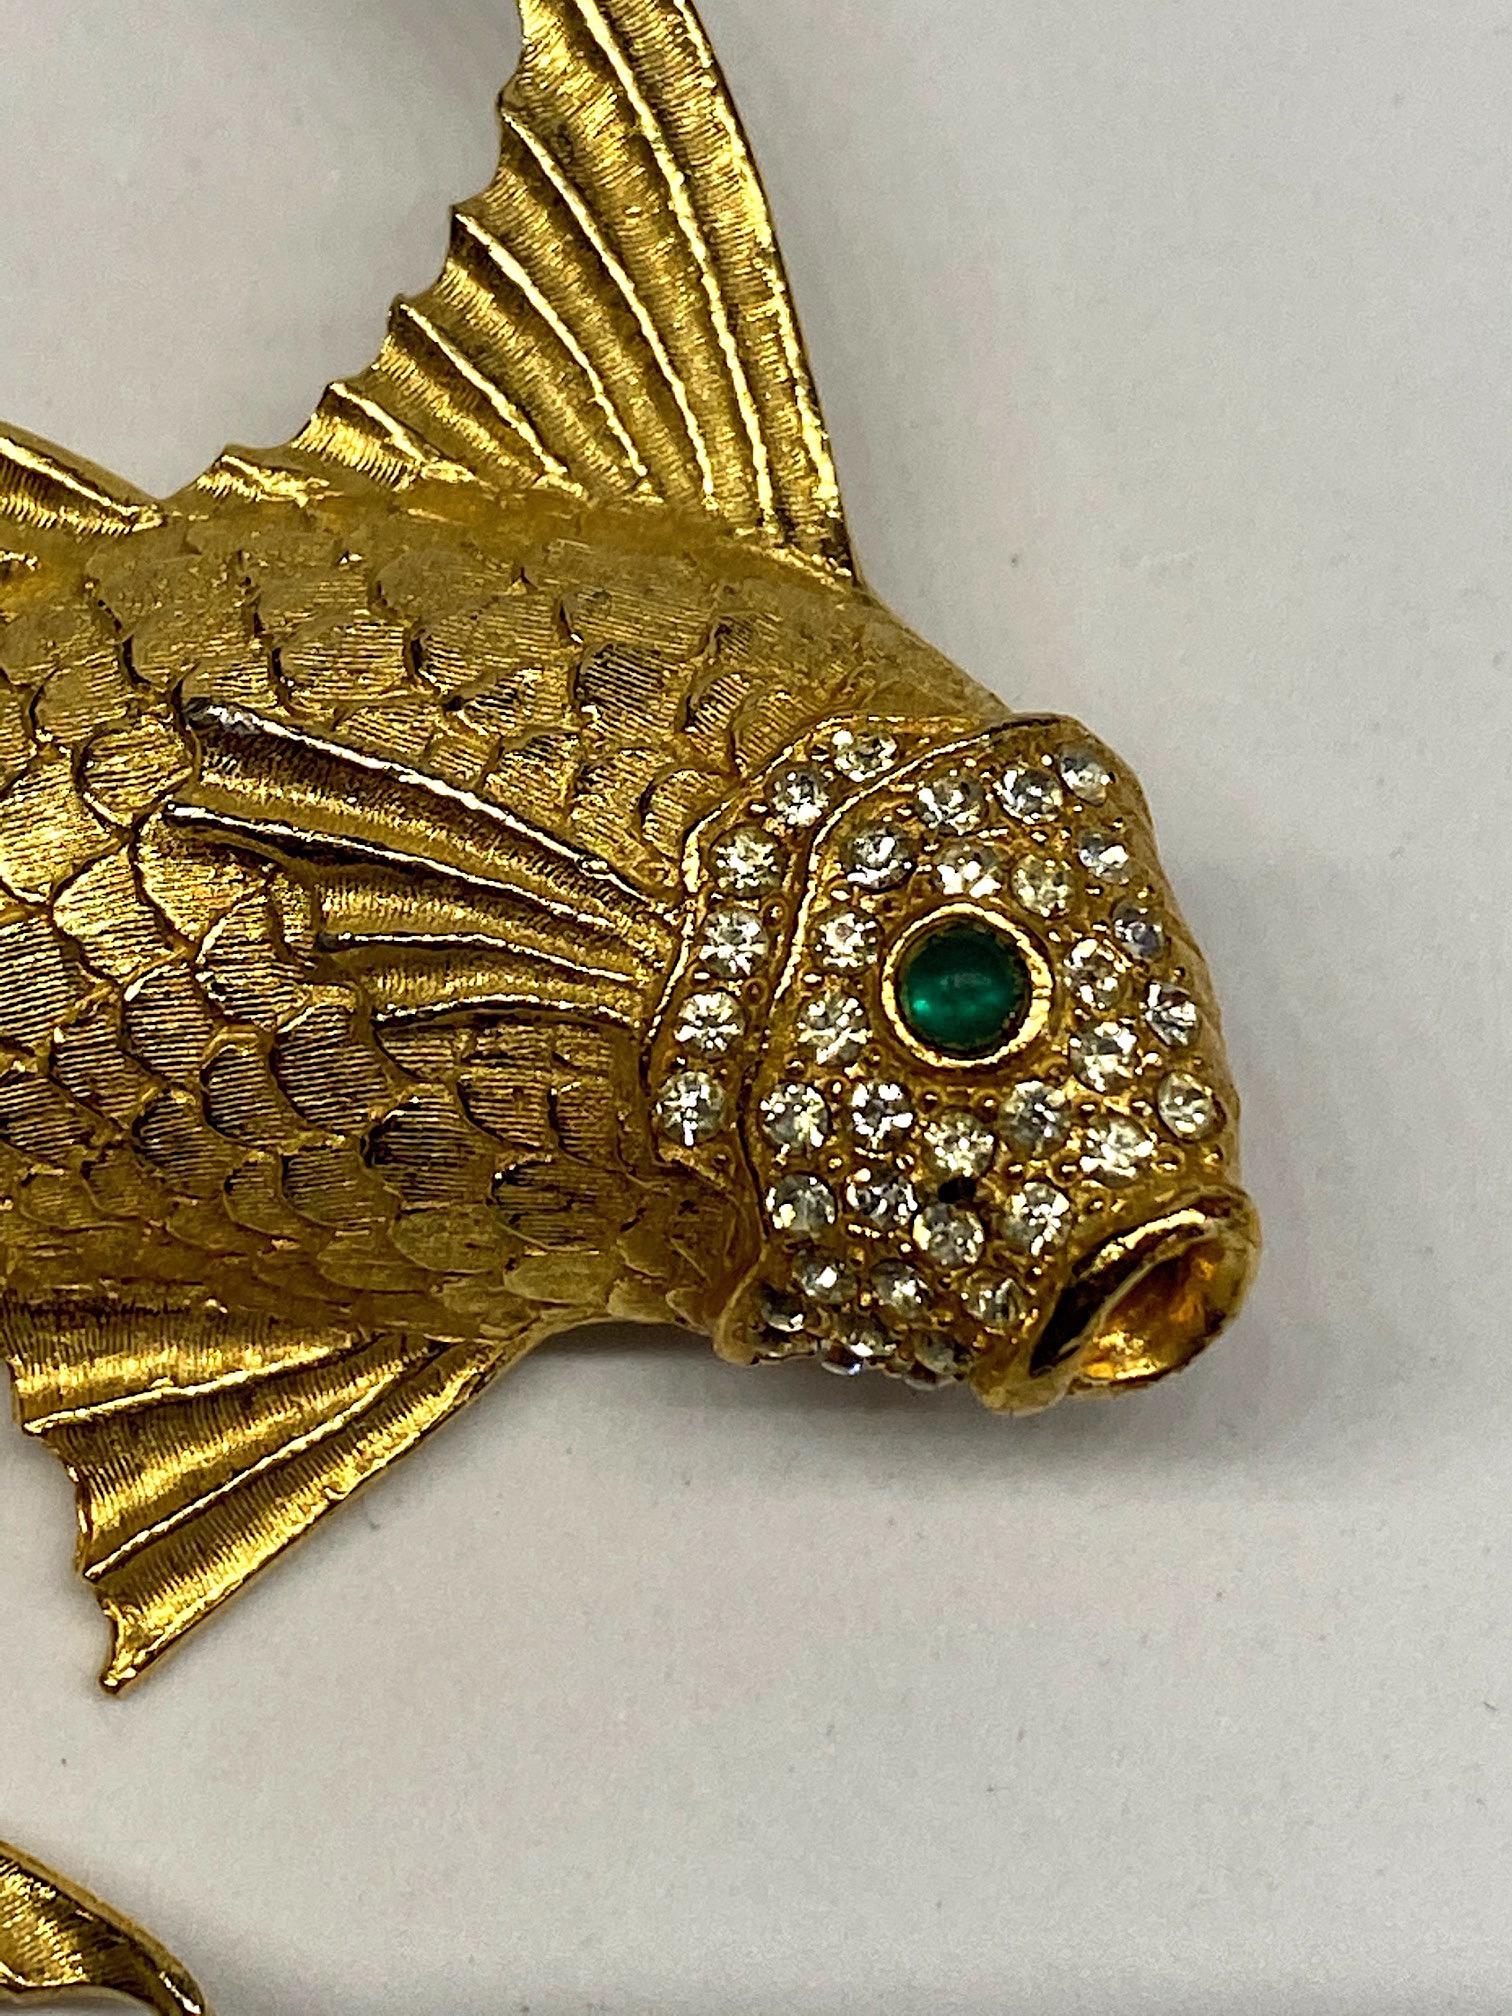 fish made of gold